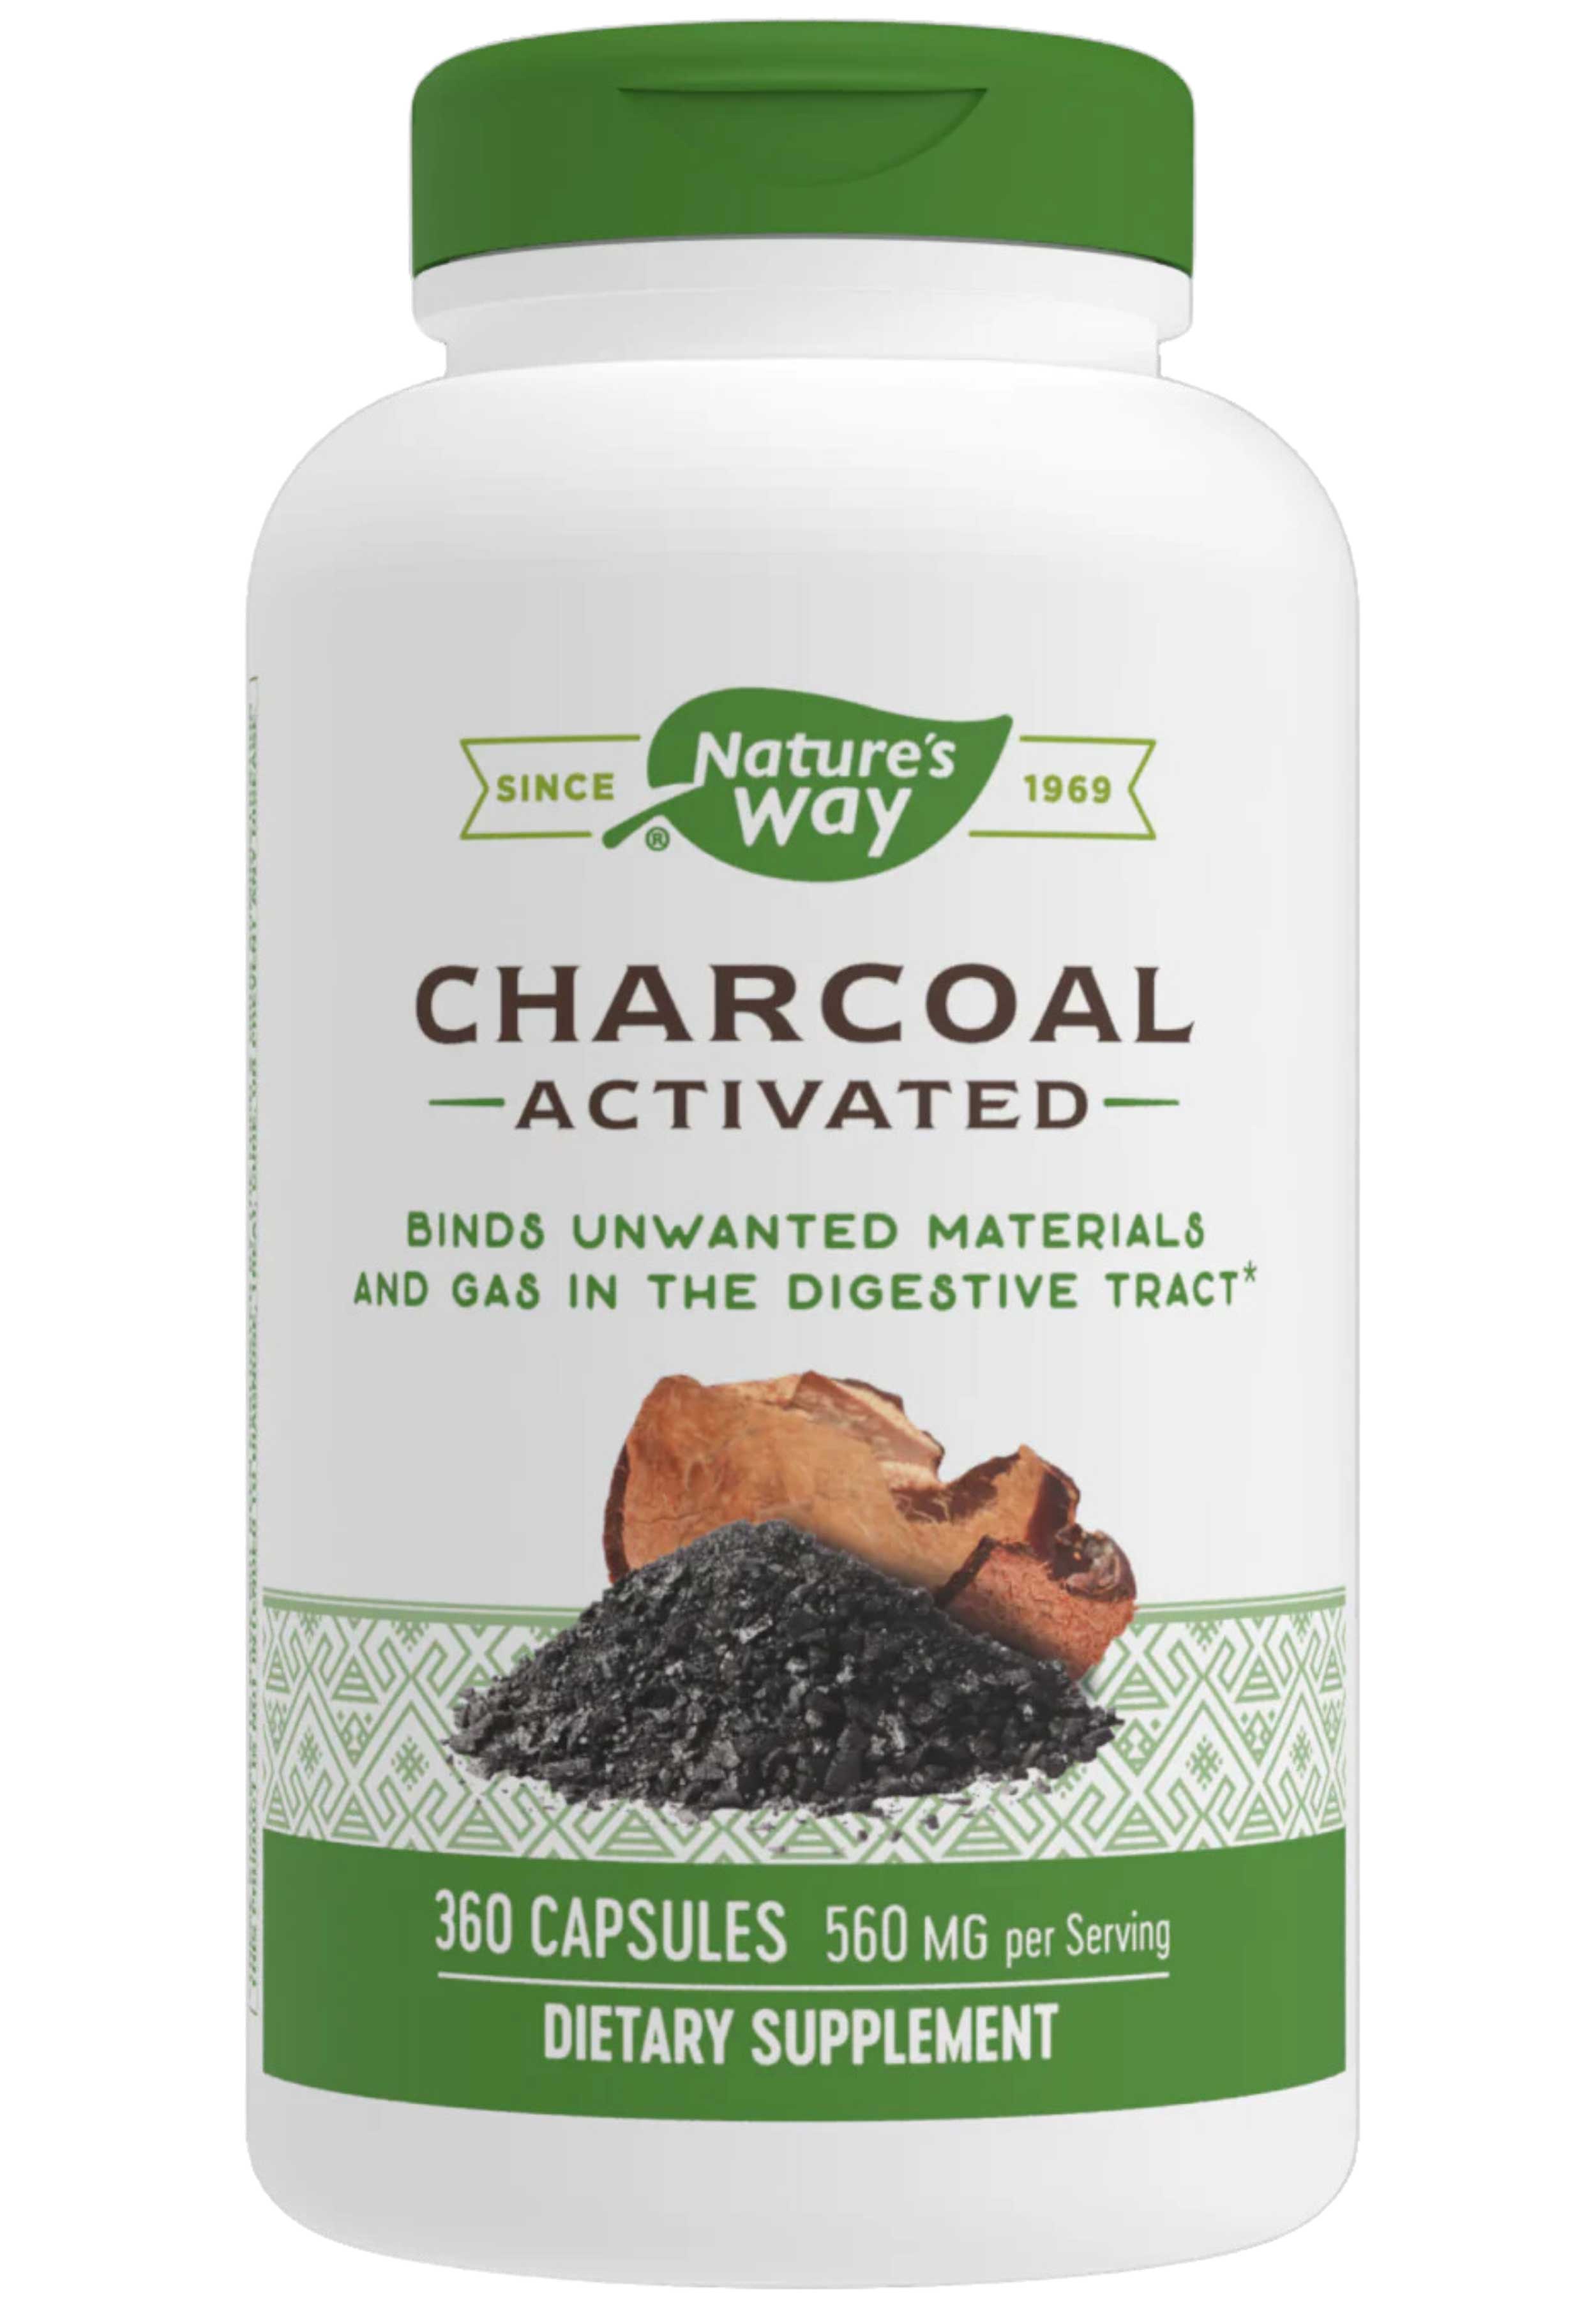 Nature's Way Charcoal Activated